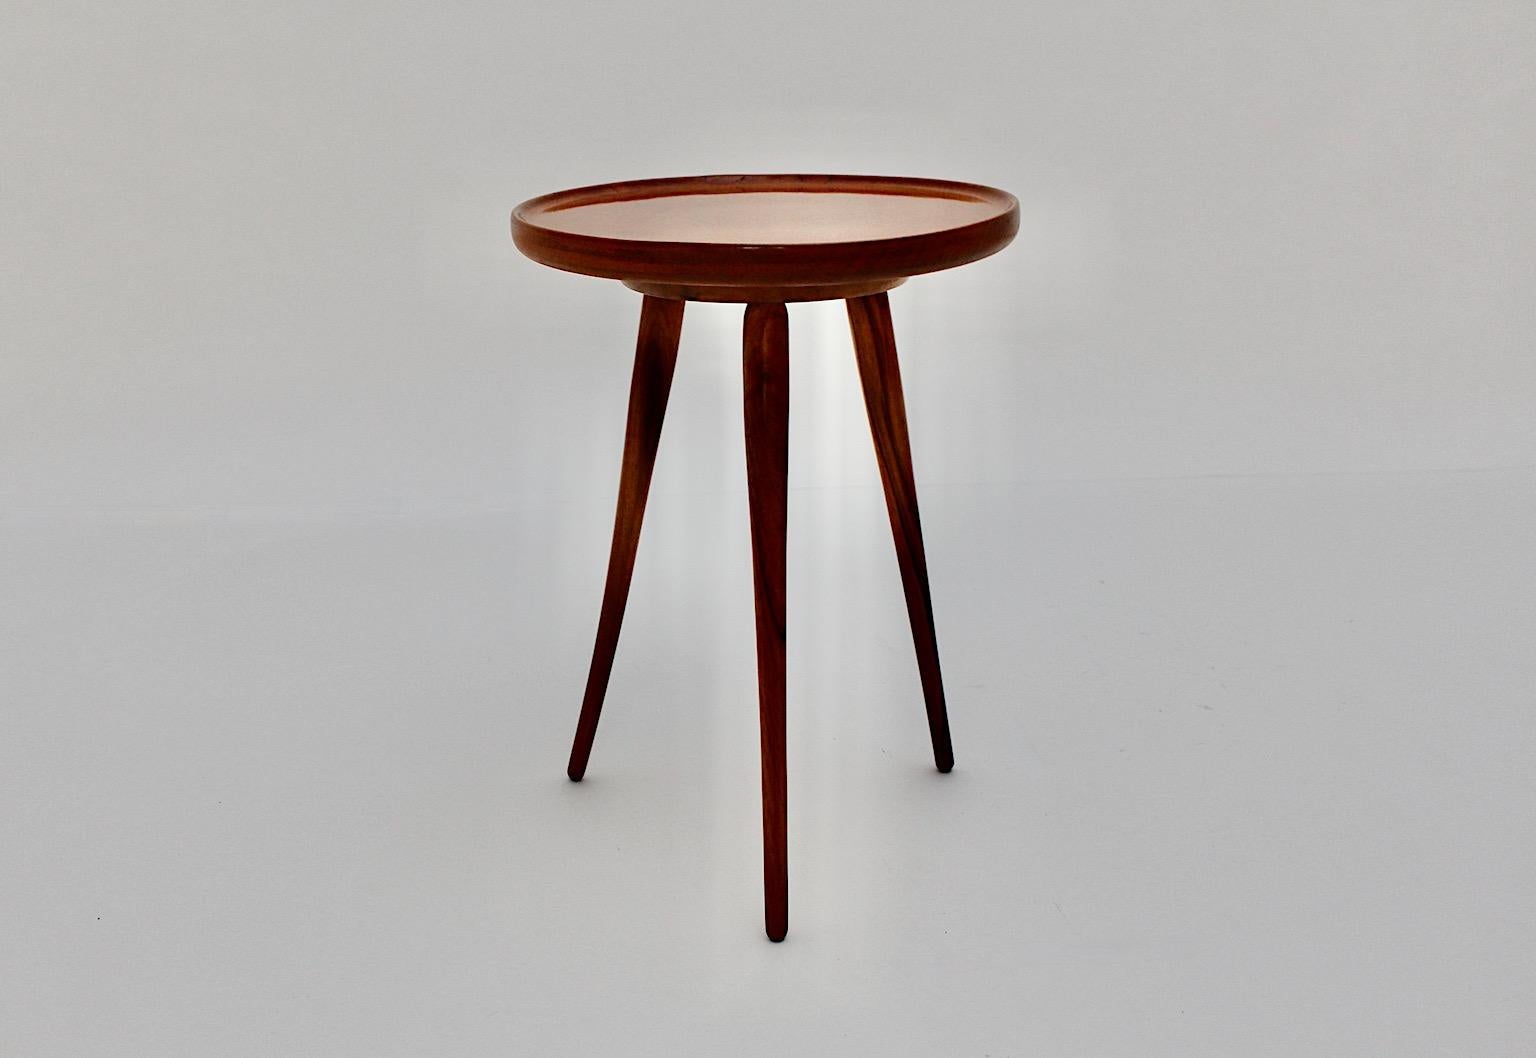 Mid-Century Modern Vintage Tiny Walnut Flower Stand Side Table, 1950s, Austria For Sale 3